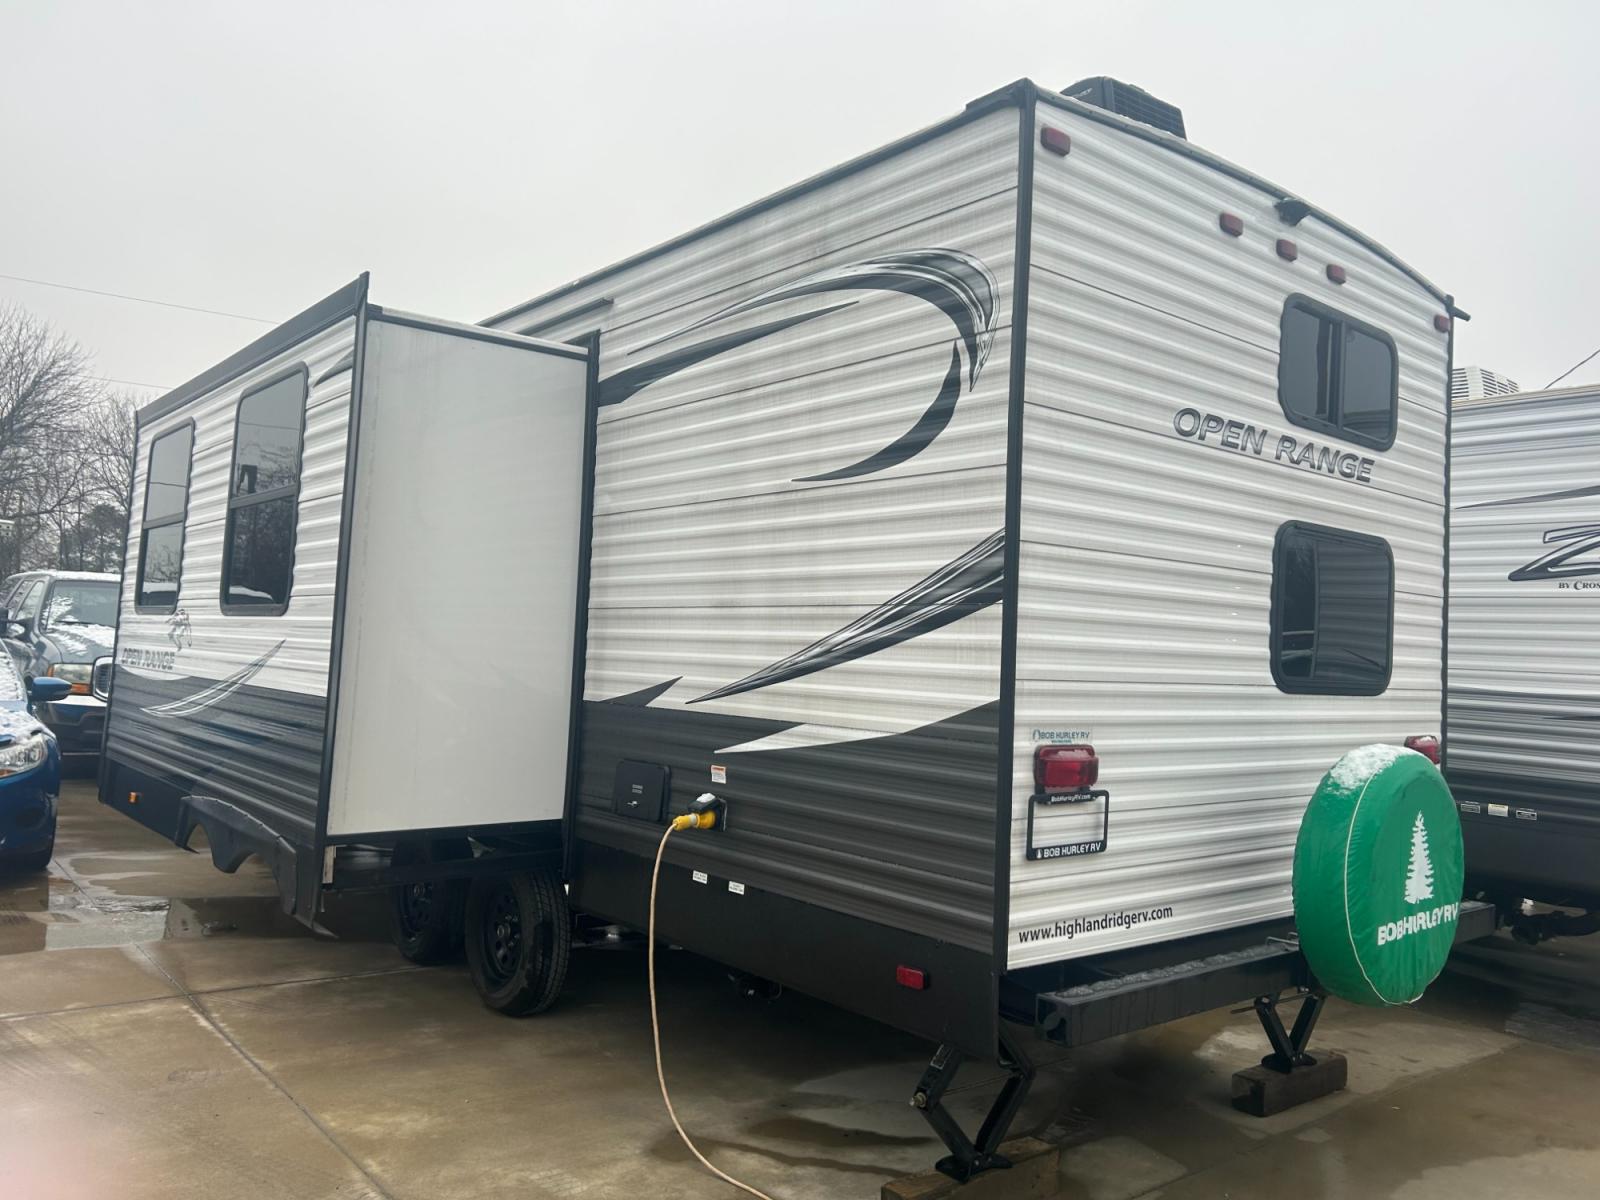 2021 White /TAN Highland Ridge RV, Inc OPEN RANGE 26BHS (58TBH0BP7M1) , located at 17760 Hwy 62, Morris, OK, 74445, 35.609104, -95.877060 - 2021 HIGHLAND RIDGE OPEN RANGE IS PERFECT FOR A SMALL FAMILY OR A LARGE. THIS CAMPER IS 30.5FT LONG AND WILL SLEEP 10 PEOPLE. FEATURES A 16FT POWER AWNING, OUTSIDE STORAGE, DOUBLE AXEL, SINGLE SLIDE OUT, POWER HITCH, AND MANUAL JACKS. IN THE FRONT OF THIS CAMPER IS A QUEEN SIZED BED WITH OVERHEAD ST - Photo #2